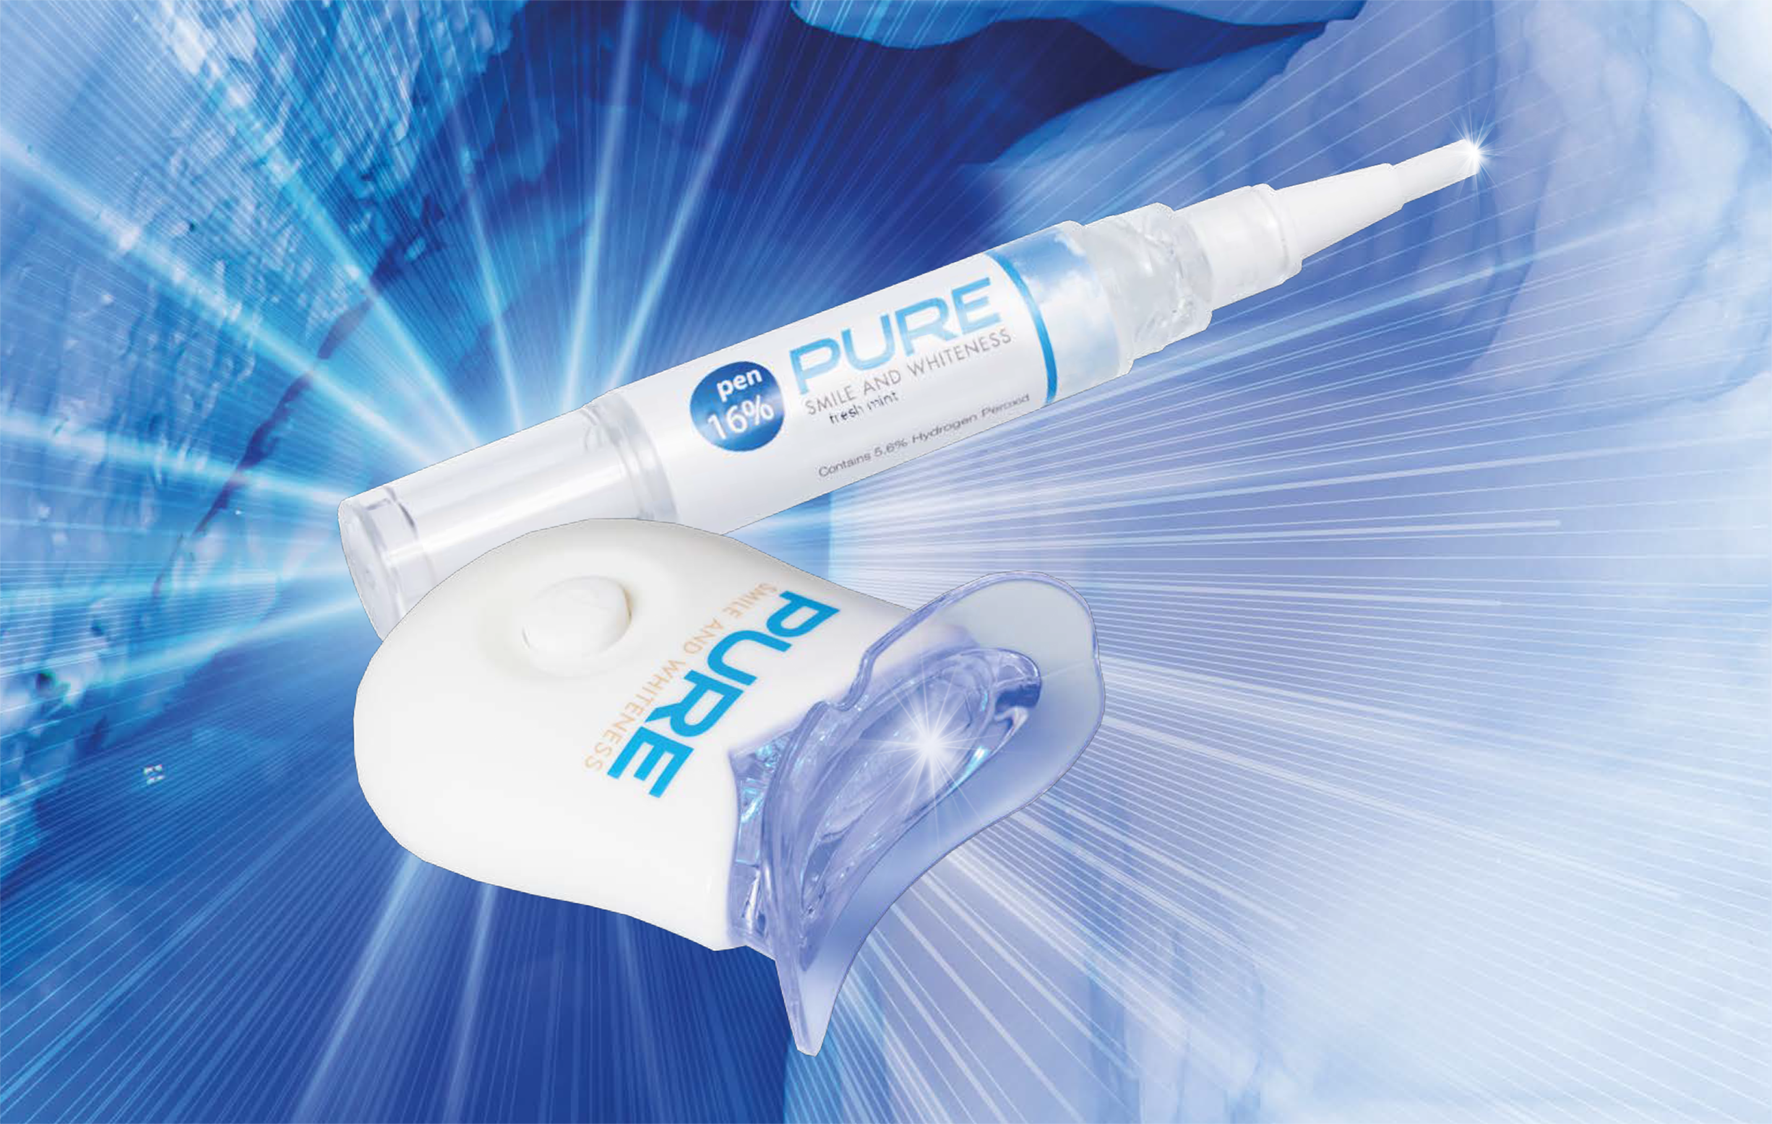 Blanqueamiento dental pure